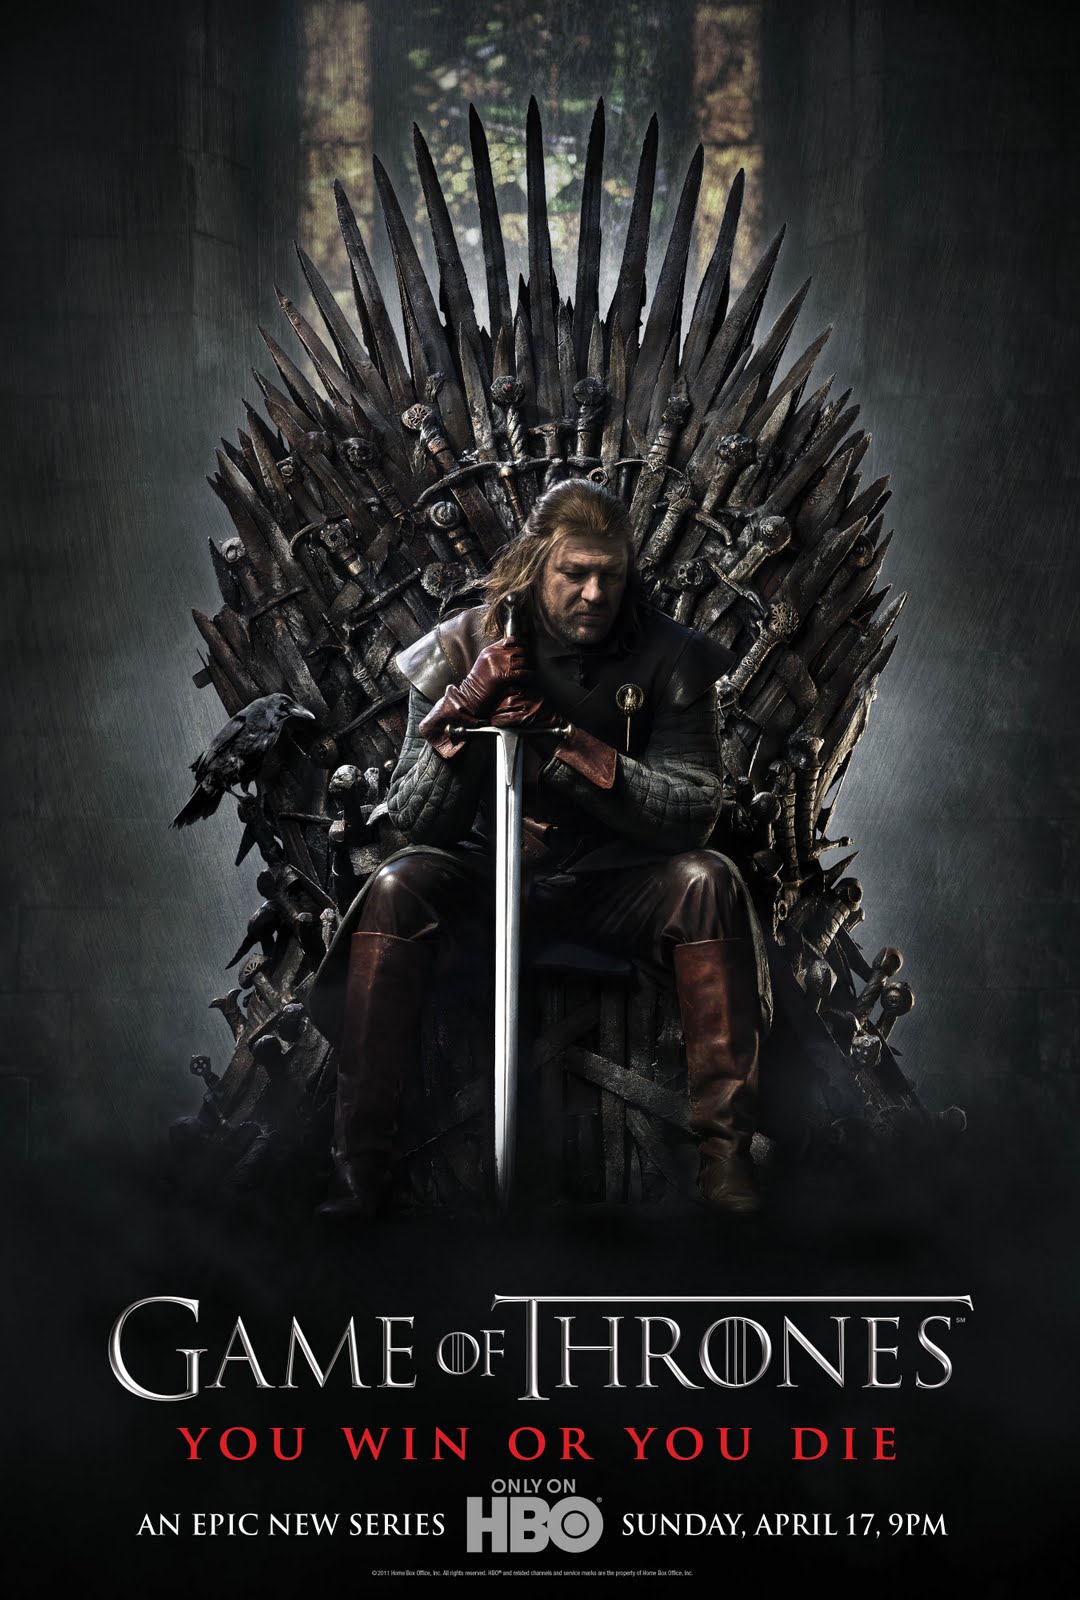 http://4.bp.blogspot.com/-XaIjph6ipv4/TbRTCeR47WI/AAAAAAAABvk/WNOCZZHUi-A/s1600/o-official-poster-for-hbo-s-fantasy-series-game-of-thrones.jpg